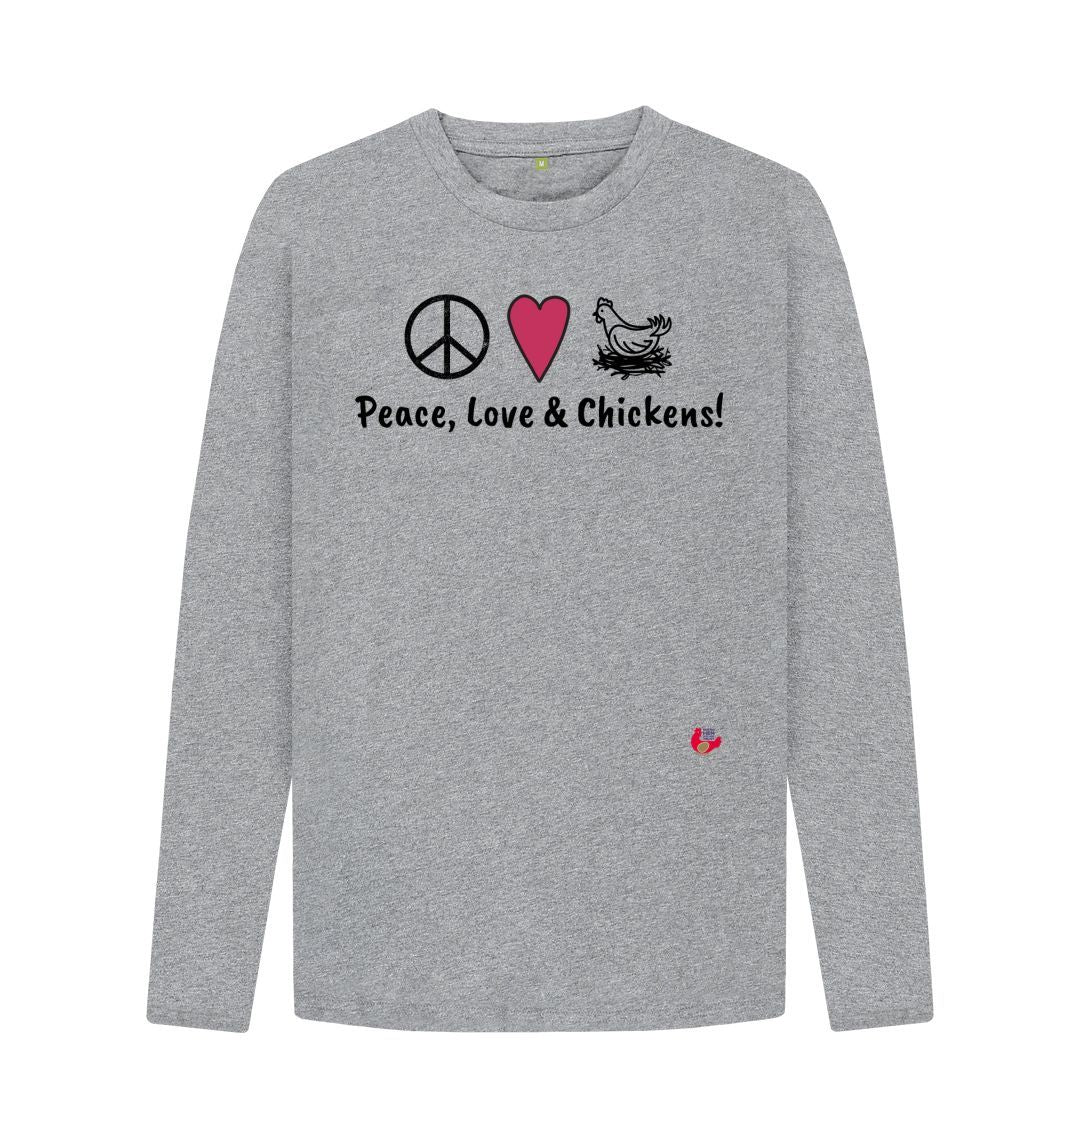 Athletic Grey Men's Long Sleeve T-Shirt - Peace, Love & Chickens - Large Logo